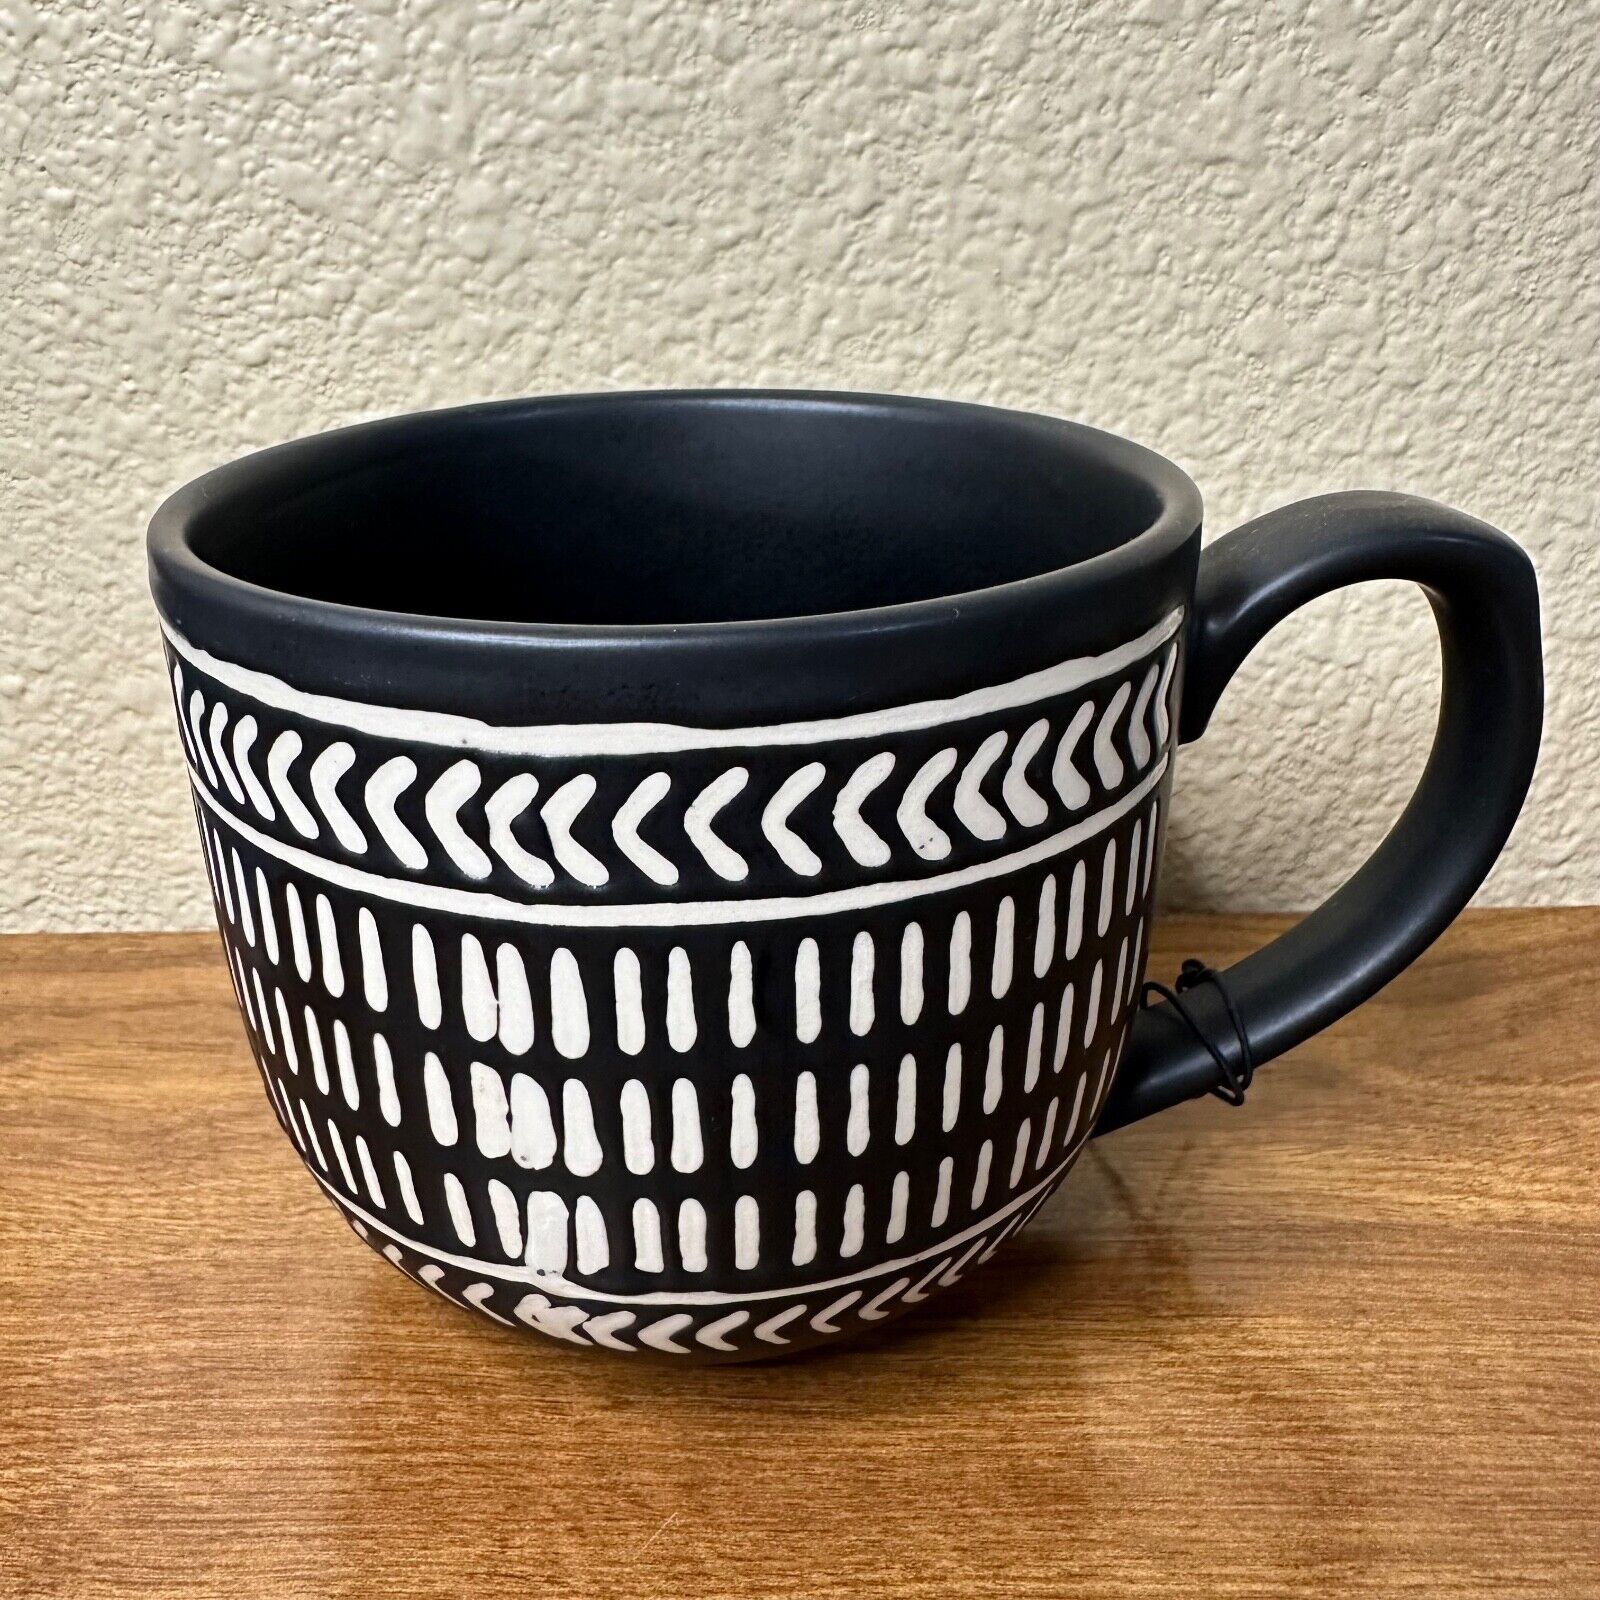 The Old Pottery Company Handcrafted Coffee Mug Black Or White